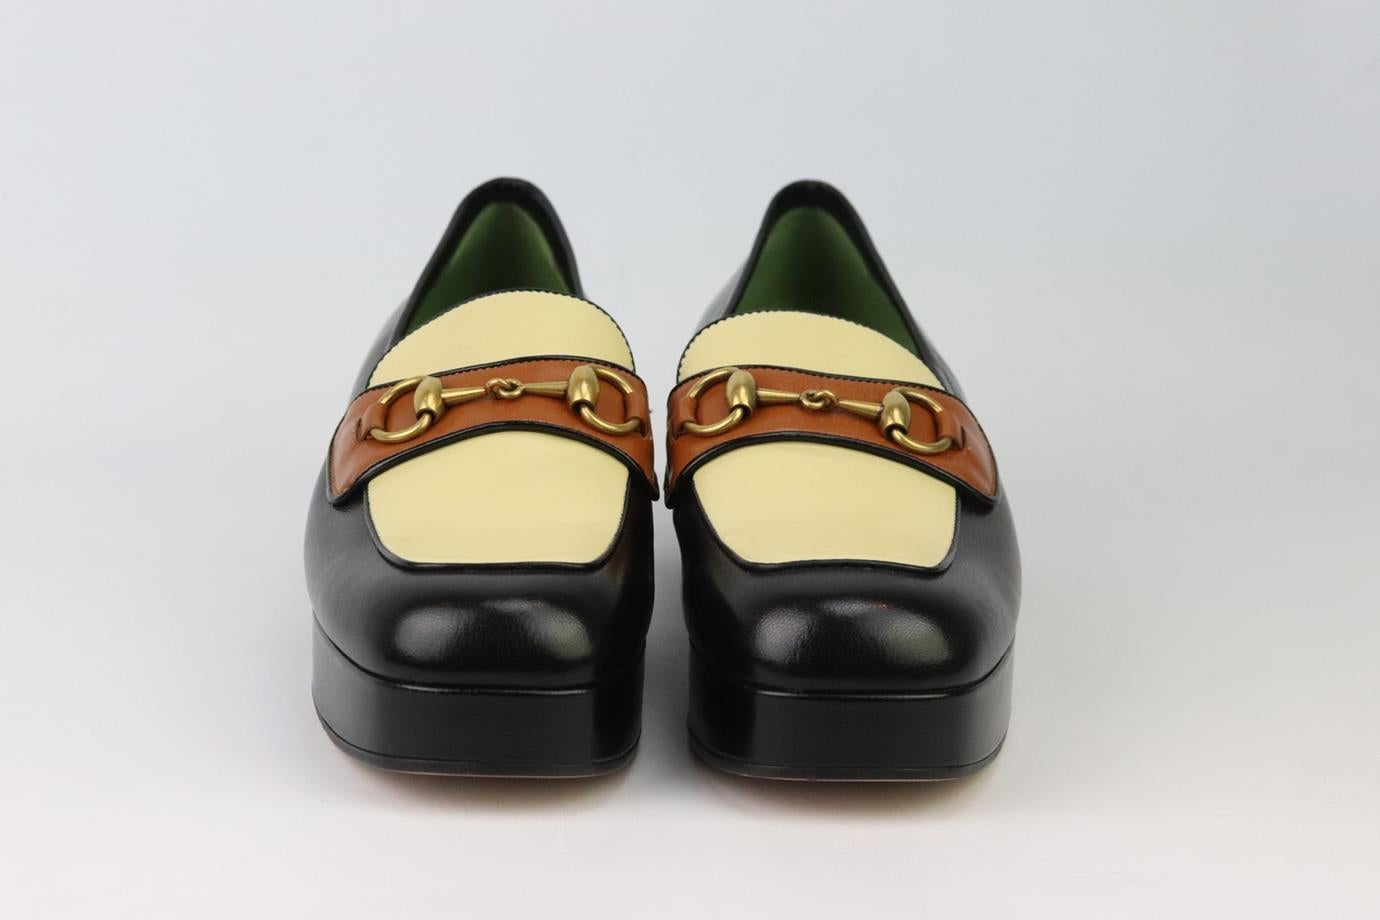 These 'Houdan' court shoes by Gucci have been made in Italy from brown, black and cream leather and set on chunky platform heels and are finished with the brand’s iconic horsebit-detail on the top. Heel measures approximately 44 mm/ 1.75 inch.